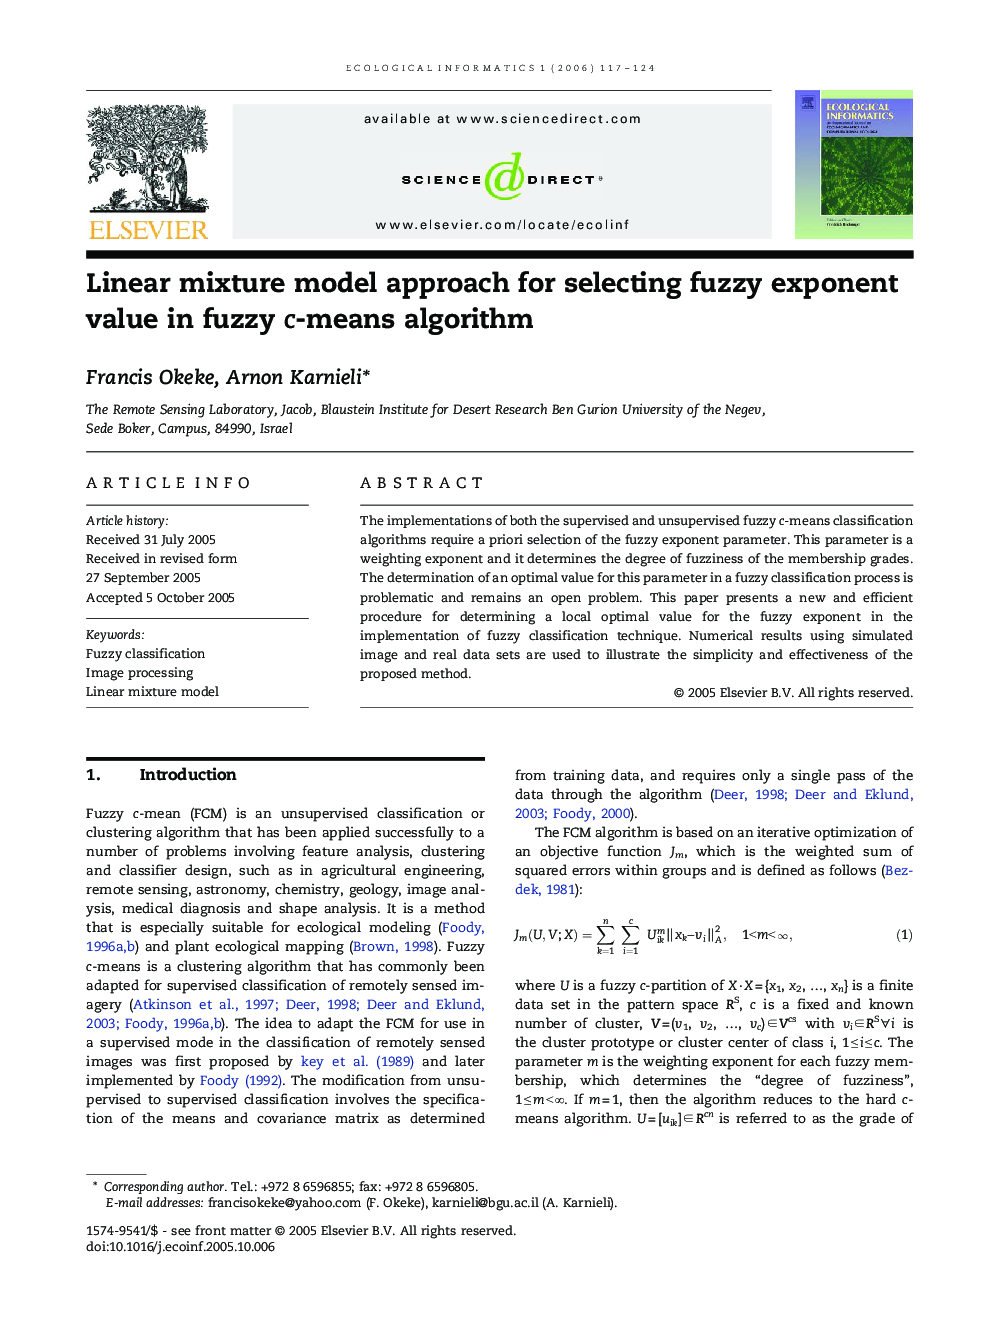 Linear mixture model approach for selecting fuzzy exponent value in fuzzy c-means algorithm